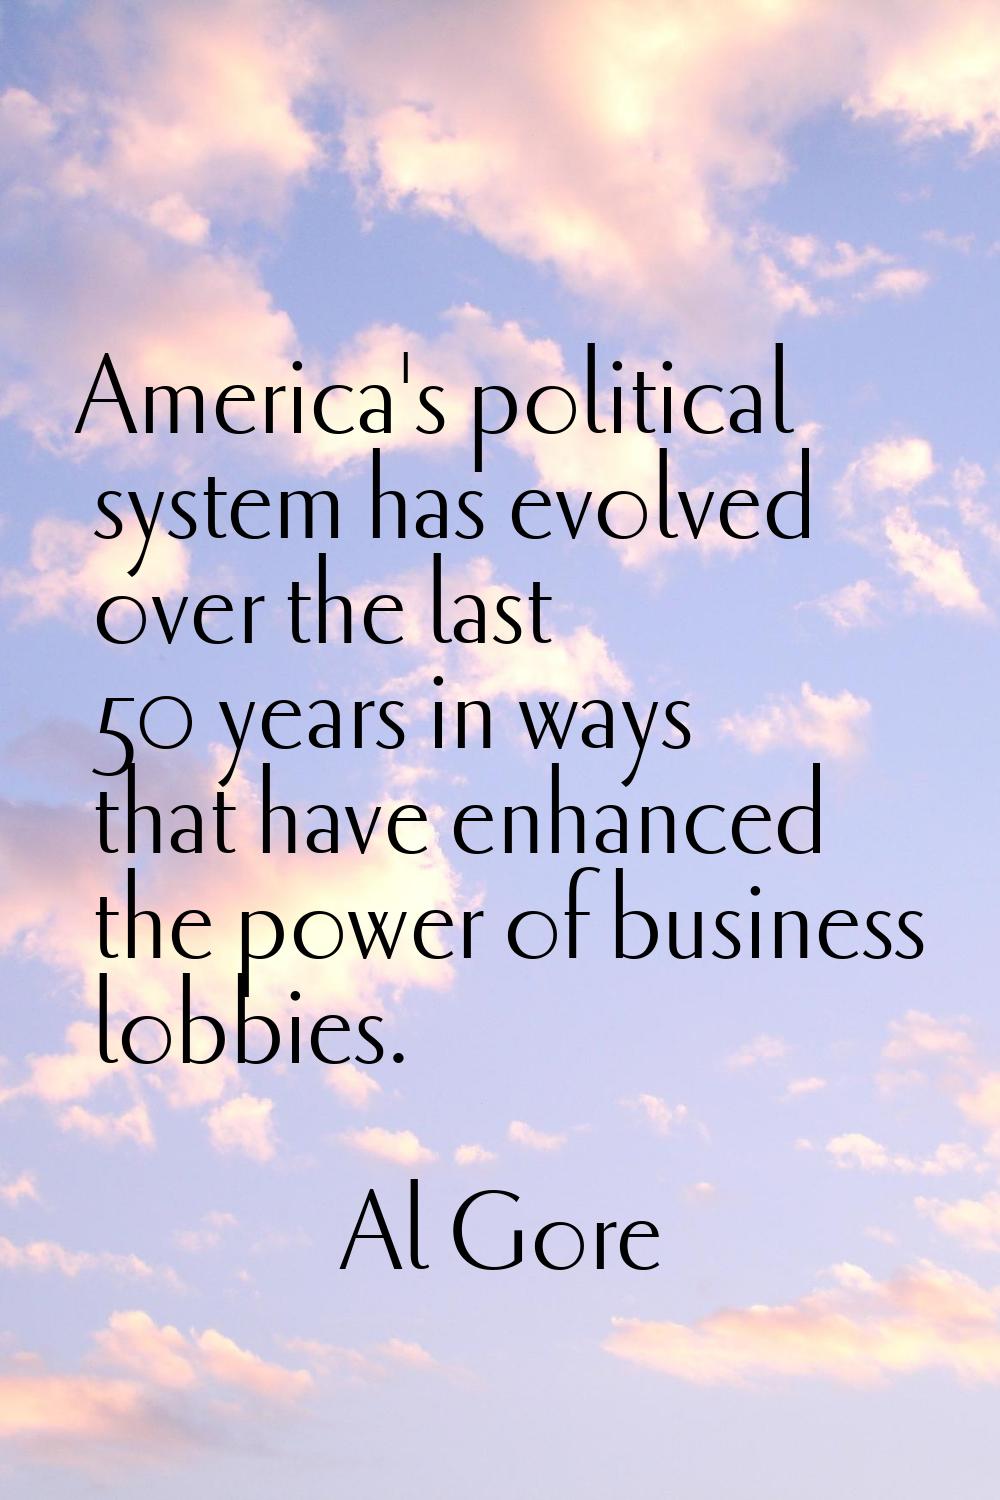 America's political system has evolved over the last 50 years in ways that have enhanced the power 